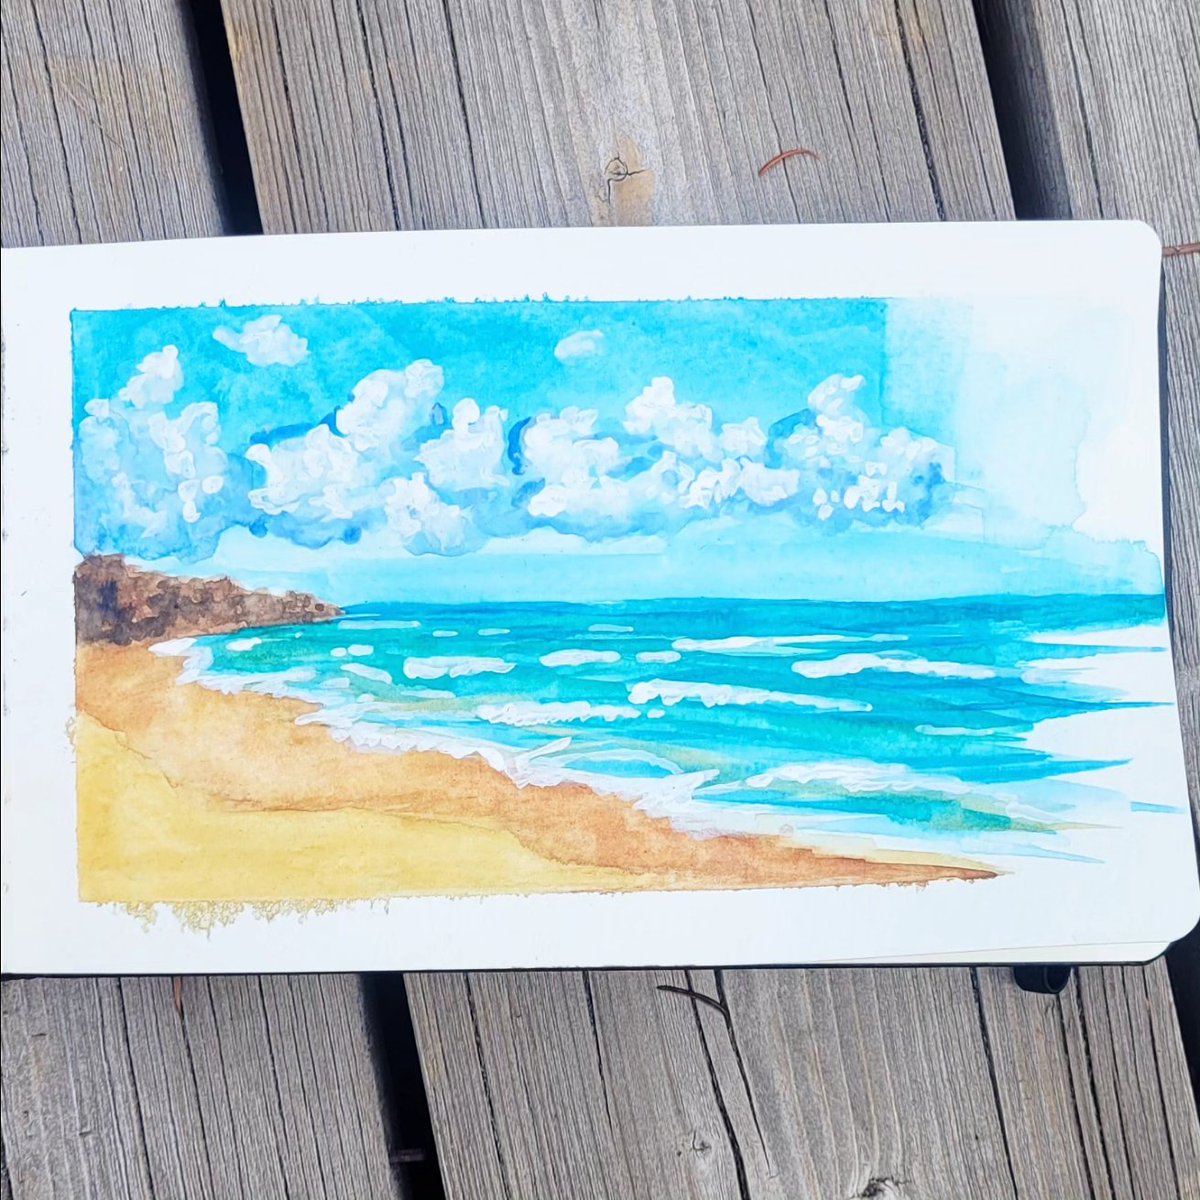 A quick ocean view in my sketchbook 🏝
#sketchbook #watercolour #guache #illustration #painting #beach #tropicalparadise #vacation #sunnydays